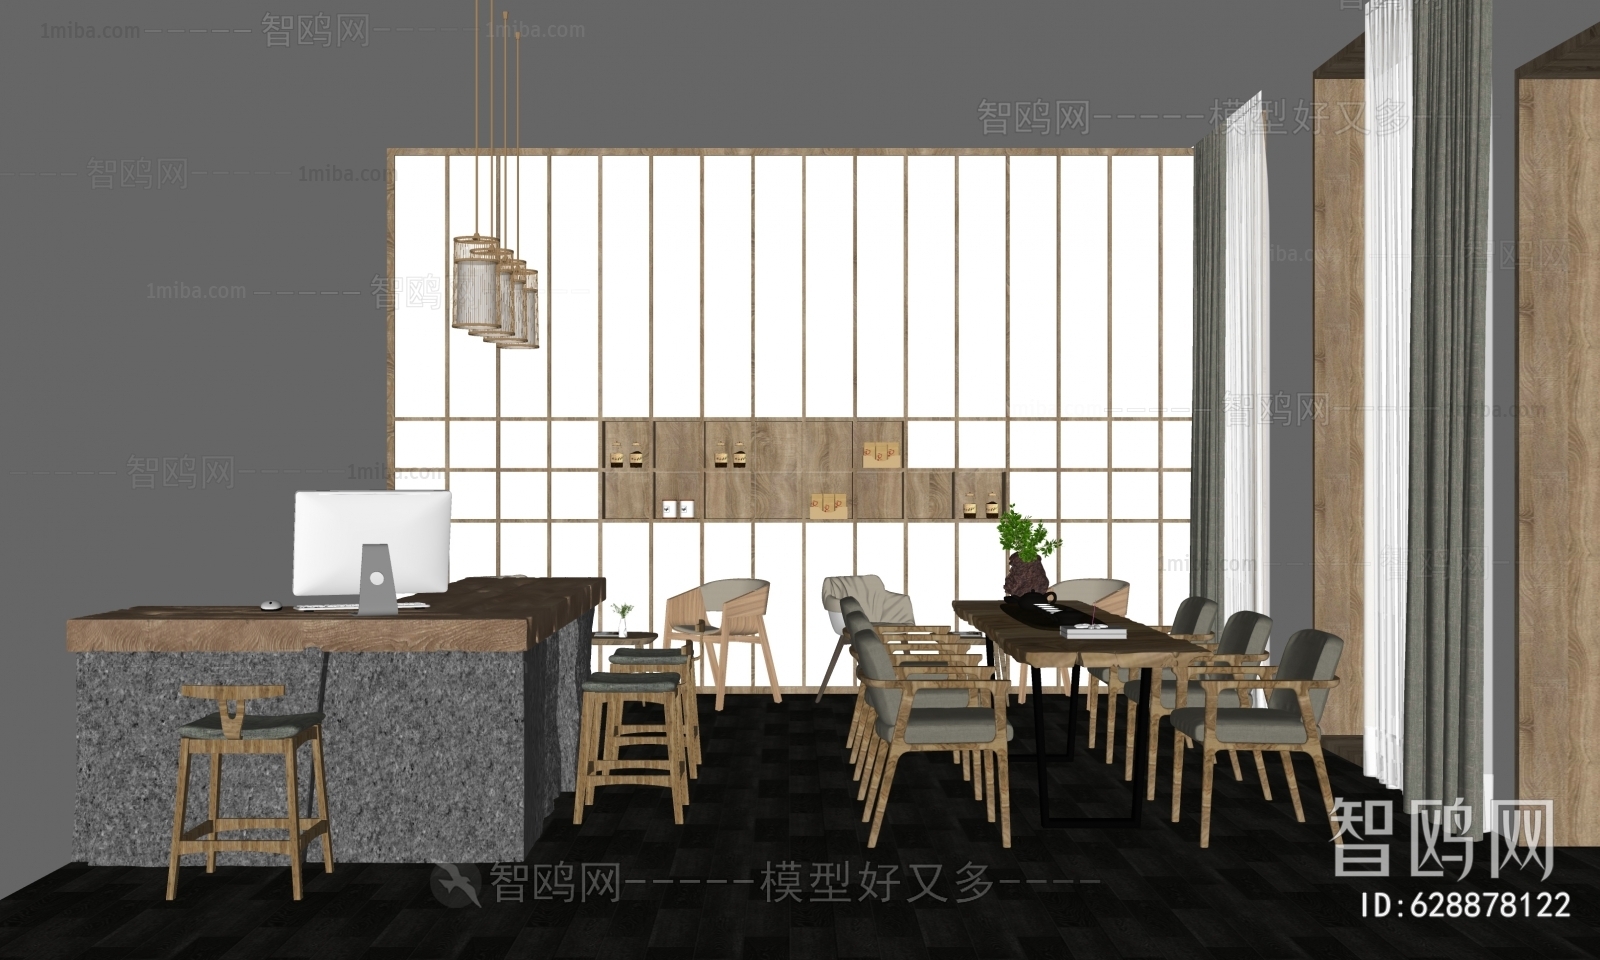 New Chinese Style Office Negotiation Area